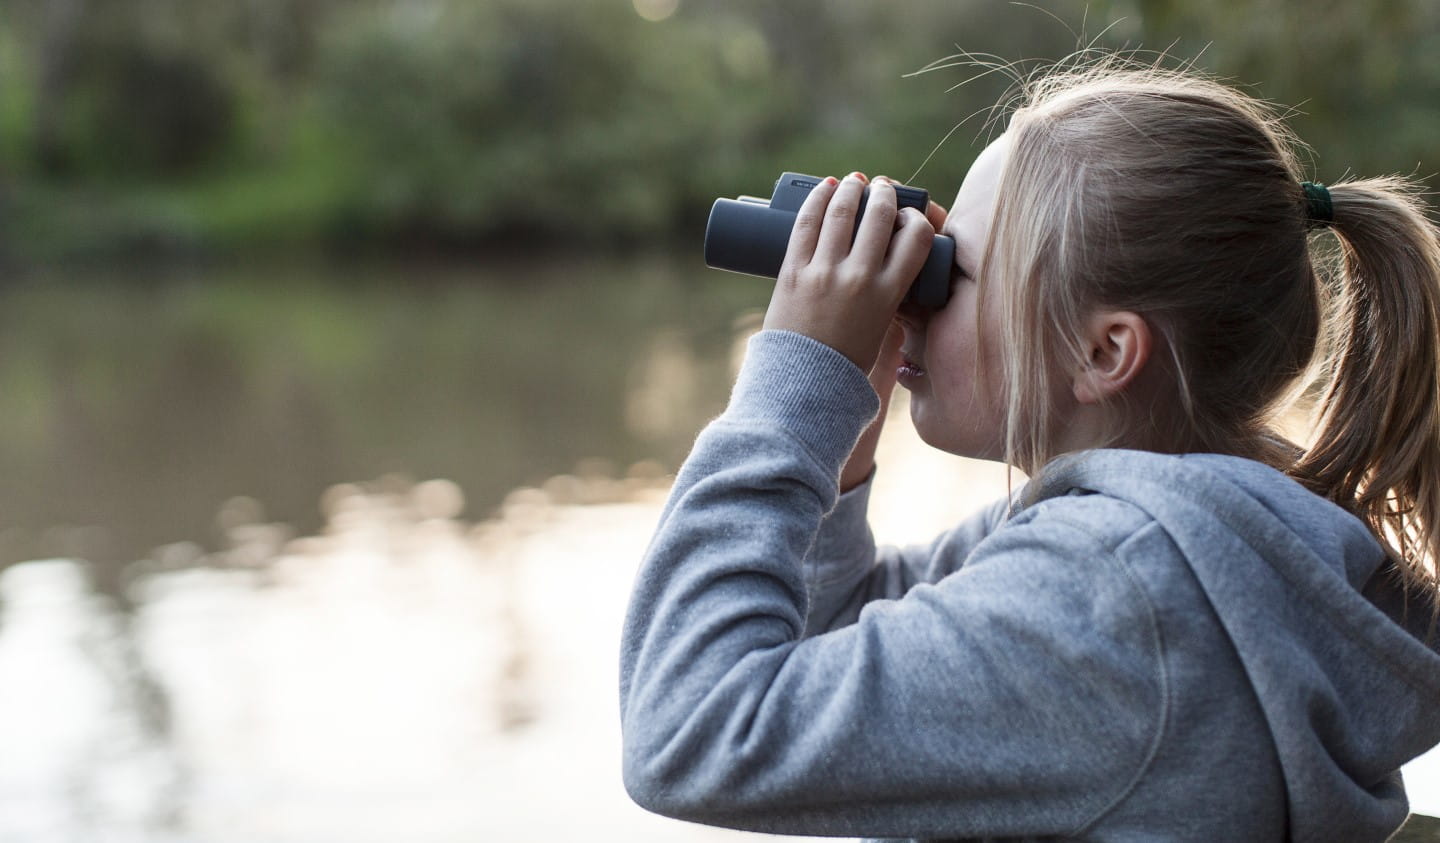 A young girl uses binoculars to search for birdlife near a river.